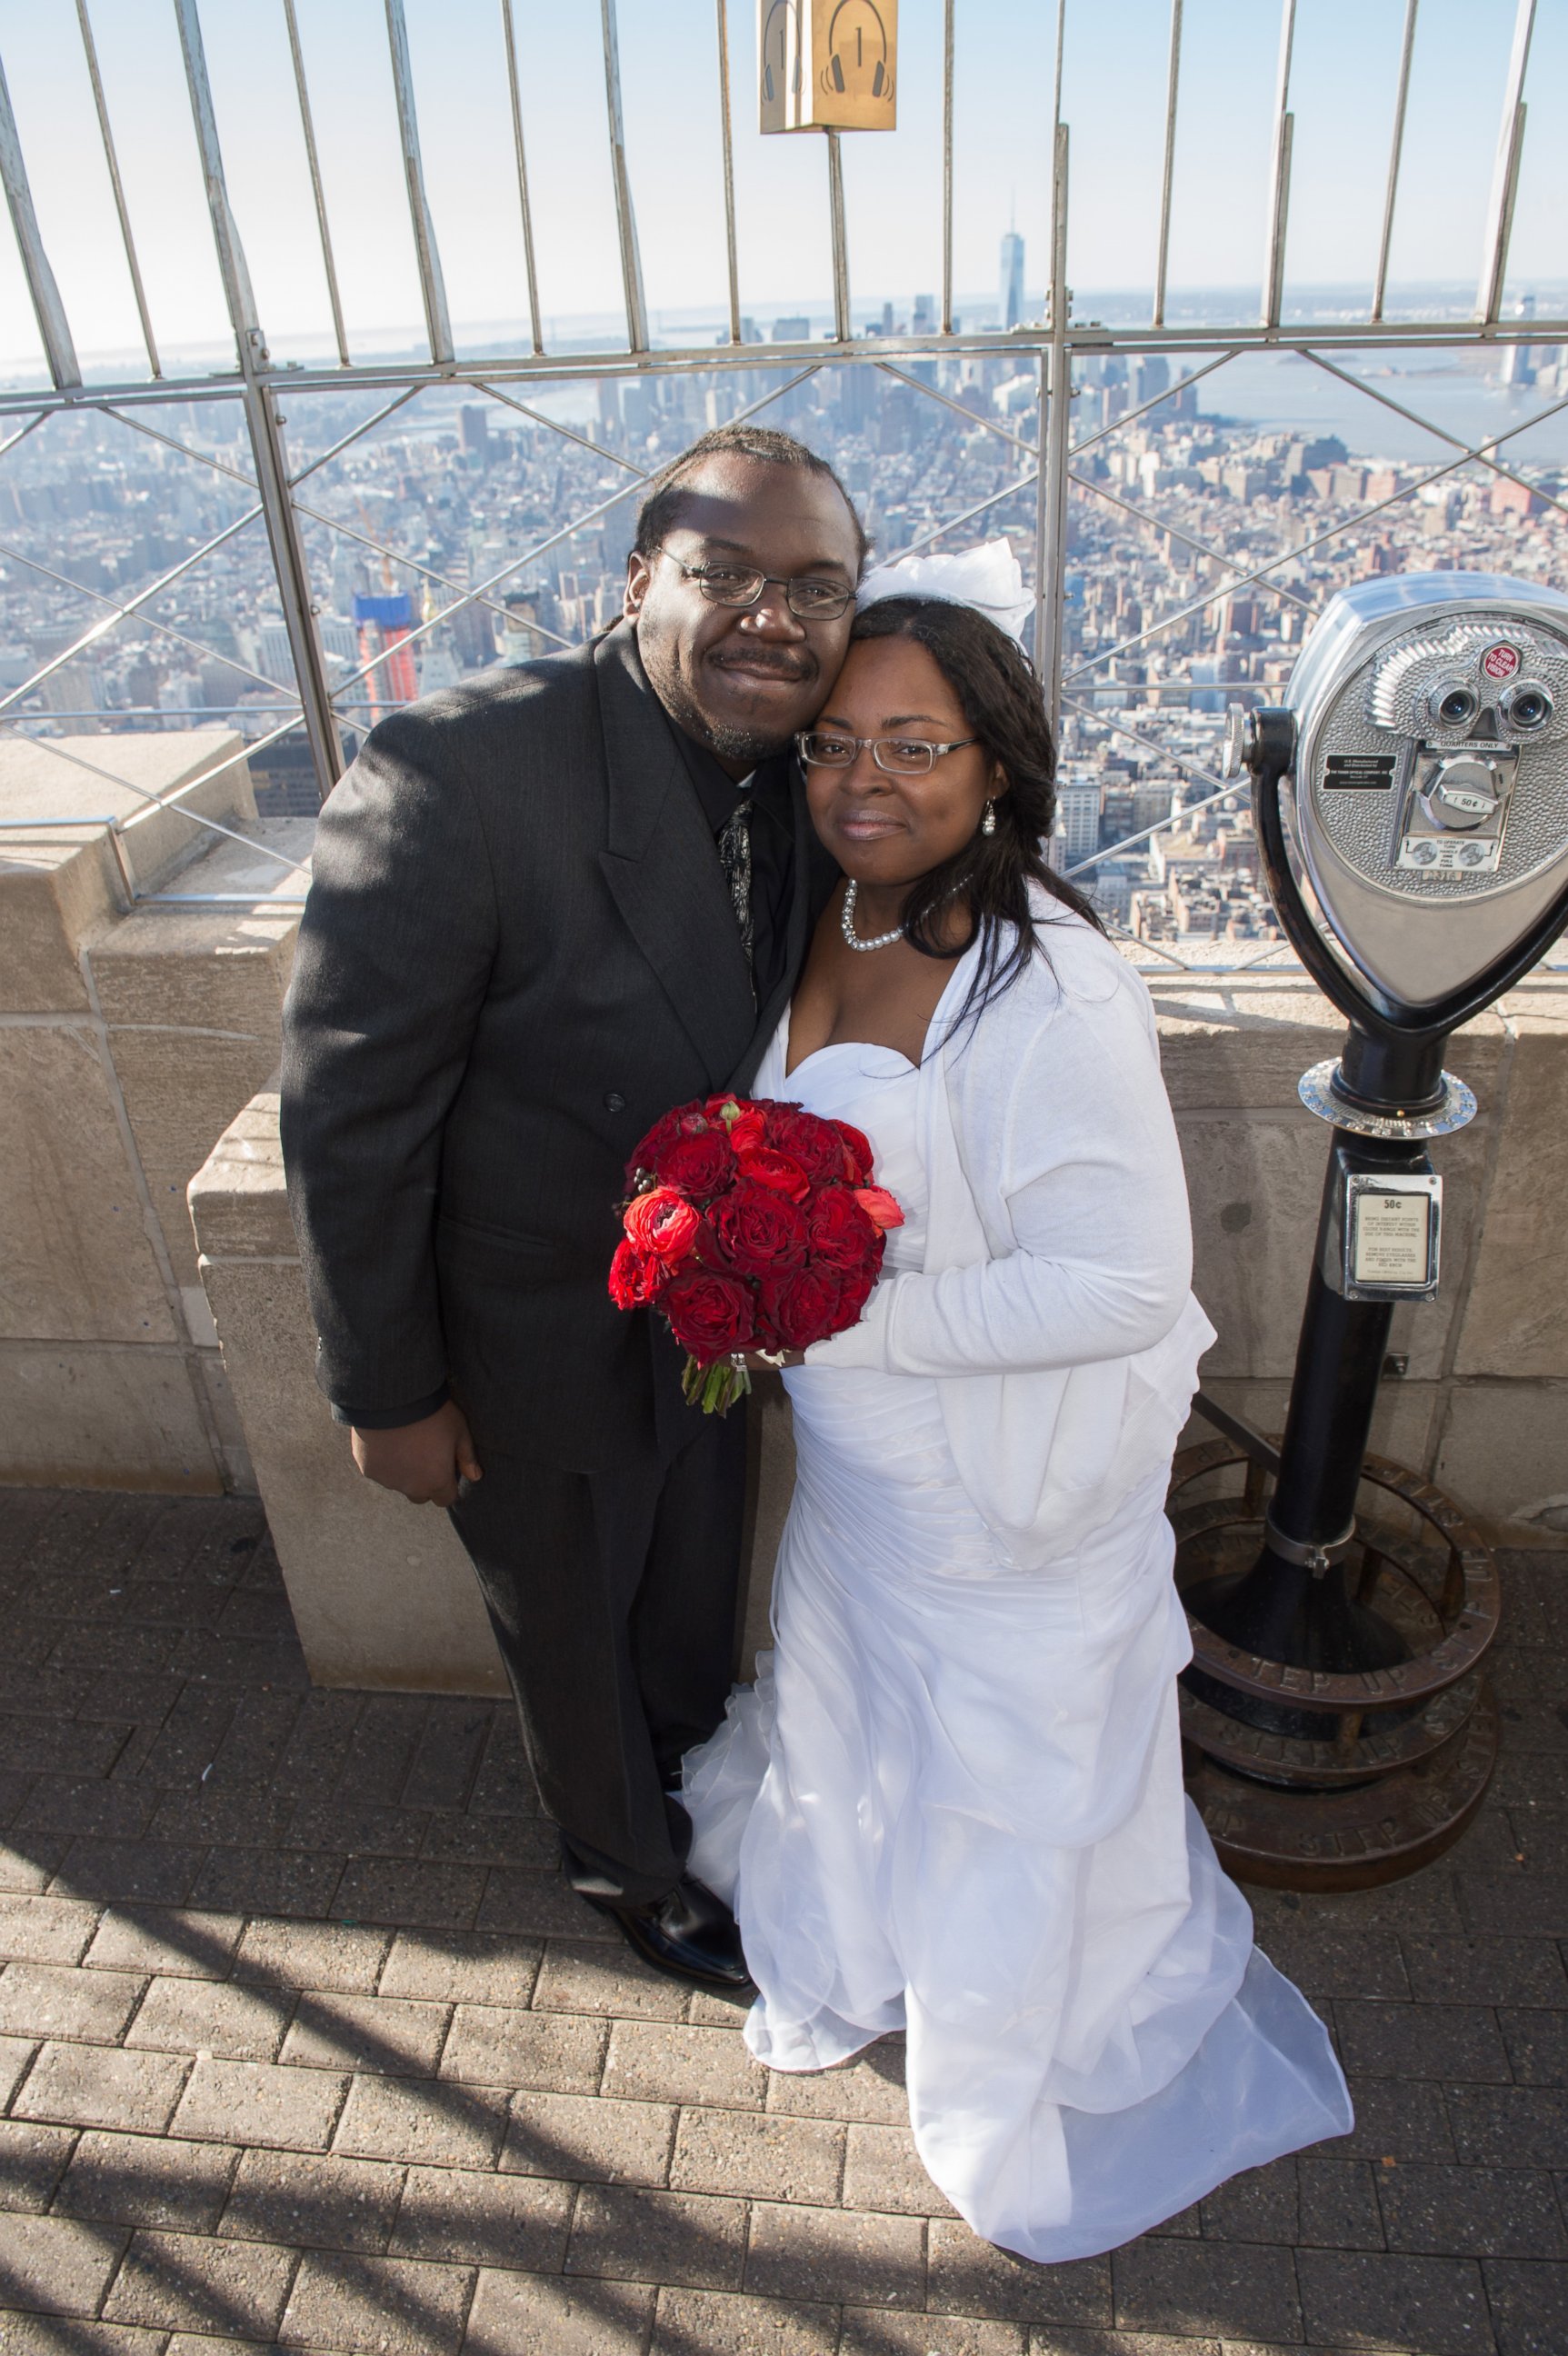 PHOTO: Sadeema Taylor and Kearney Bapteus of Port Reading, N.J. are married as the Empire State Building hosts Valentine's Day Weddings, Feb. 14, 2016.